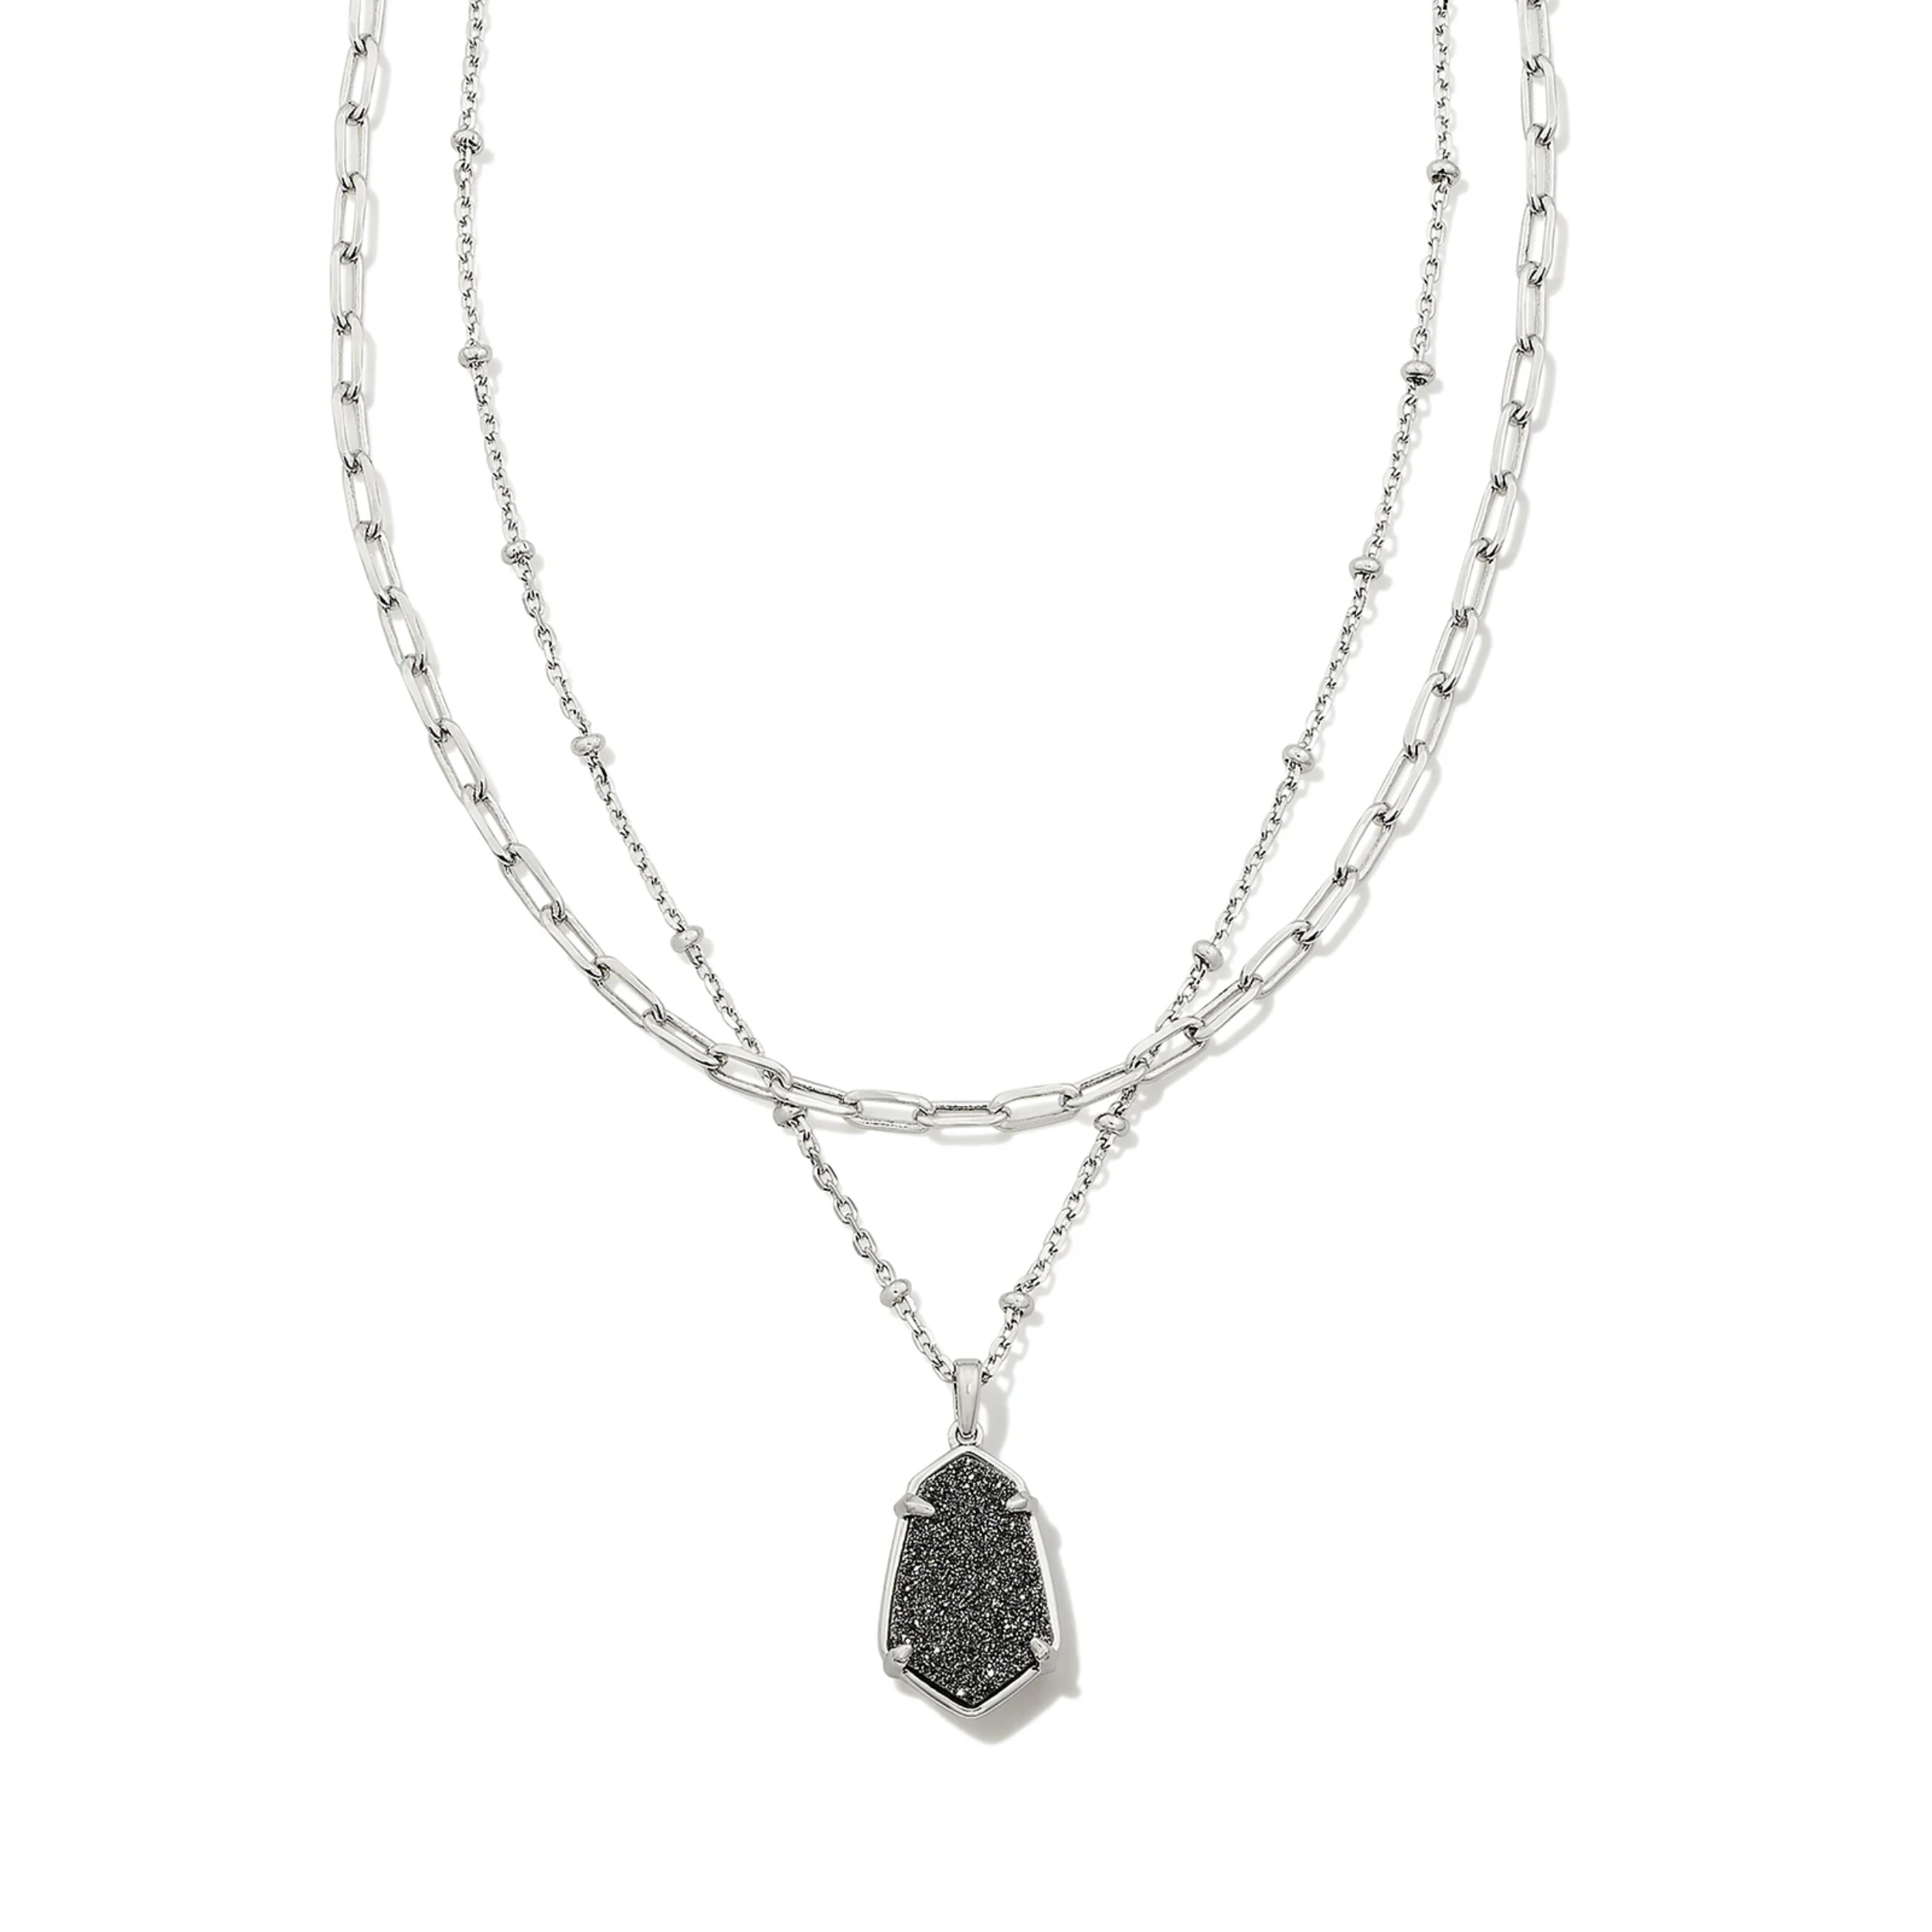 This Alexandria Silver Multi Strand Necklace in Platinum Drusy by Kendra Scott is pictured on a white background.